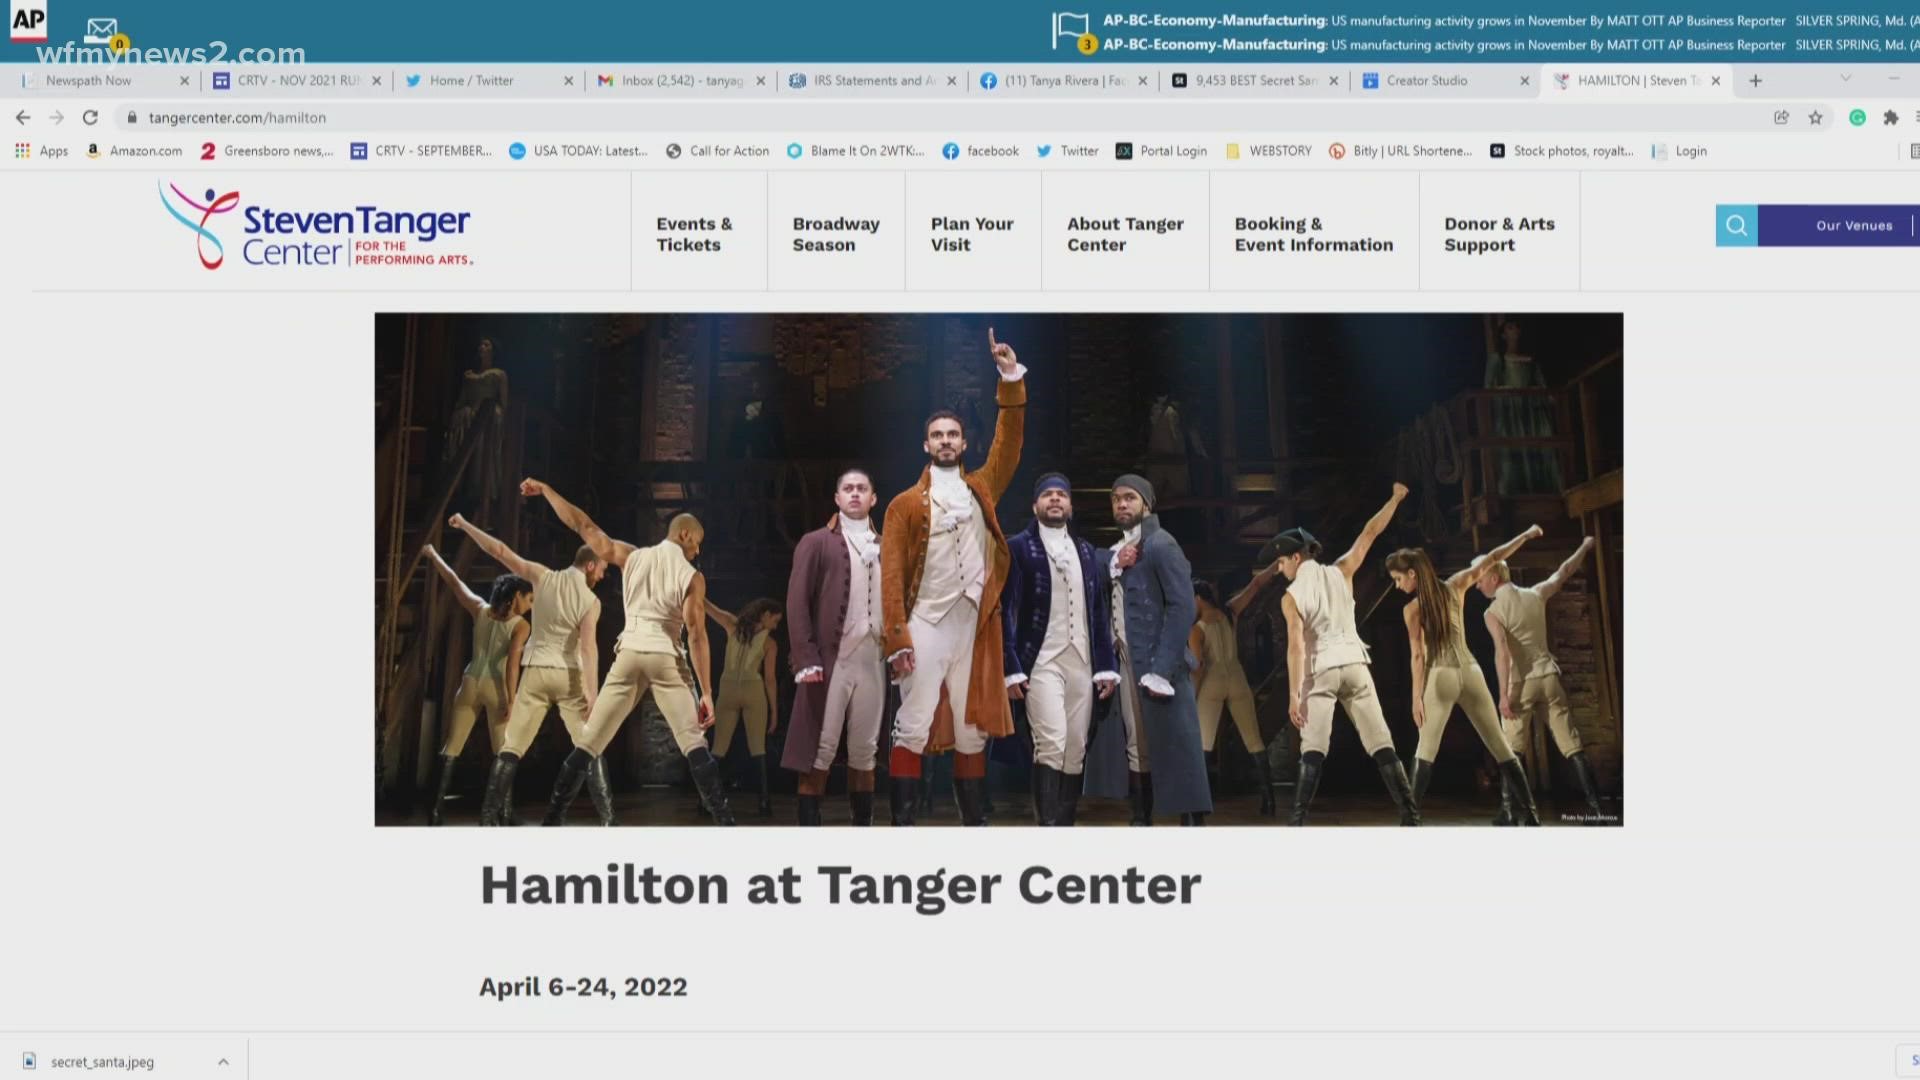 Hamilton tickets at the Tanger Center go on sale December 2, but you'll find tickets on sale now.